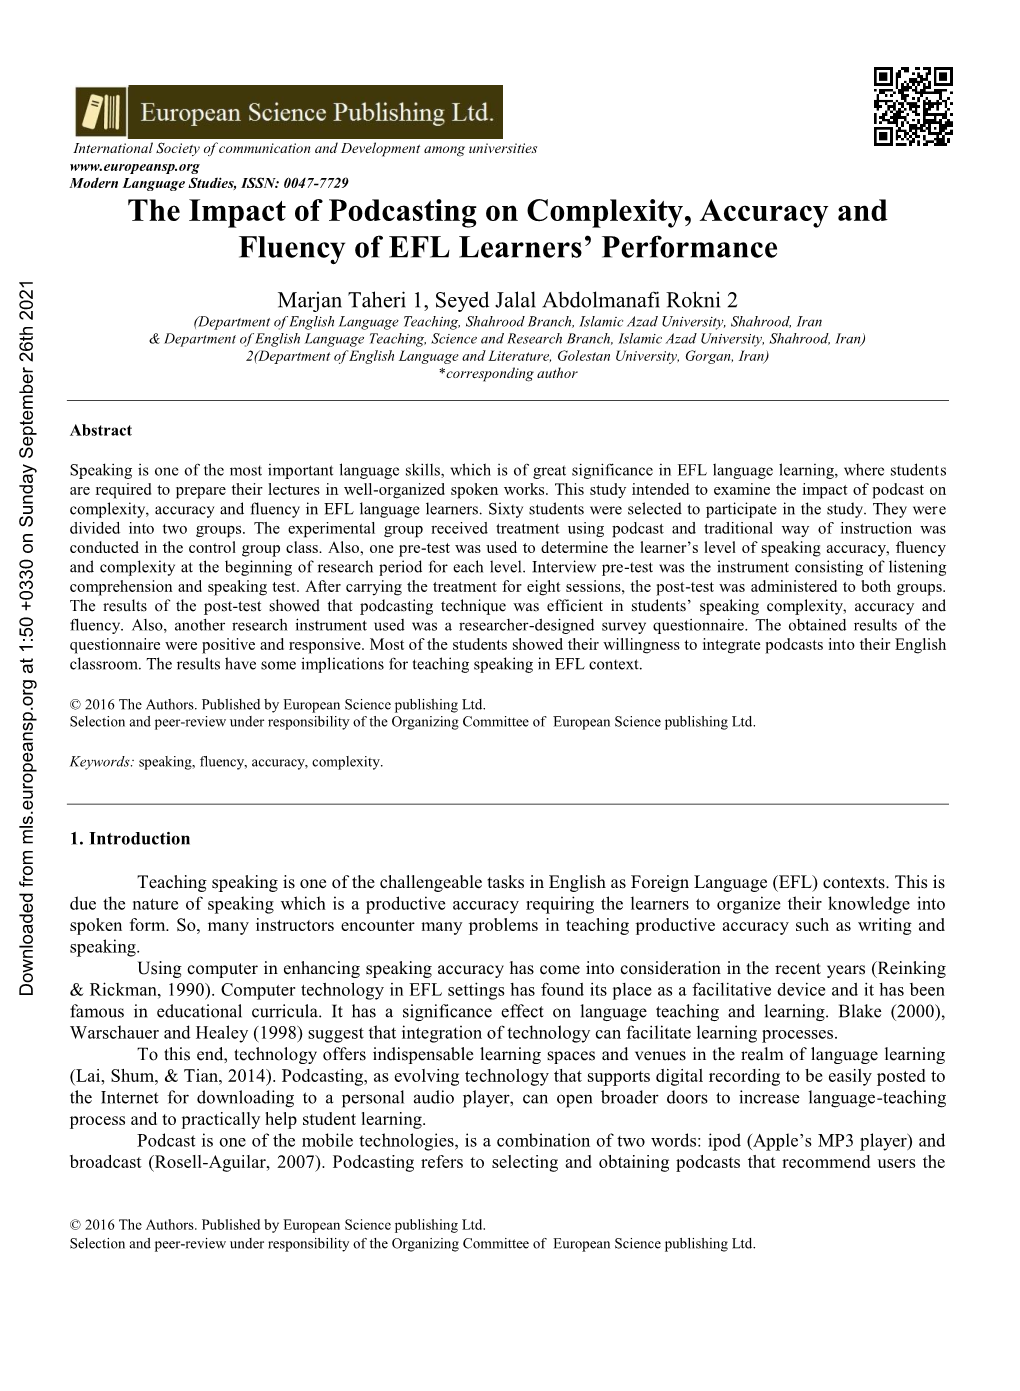 The Impact of Podcasting on Complexity, Accuracy and Fluency of EFL Learners' Performance